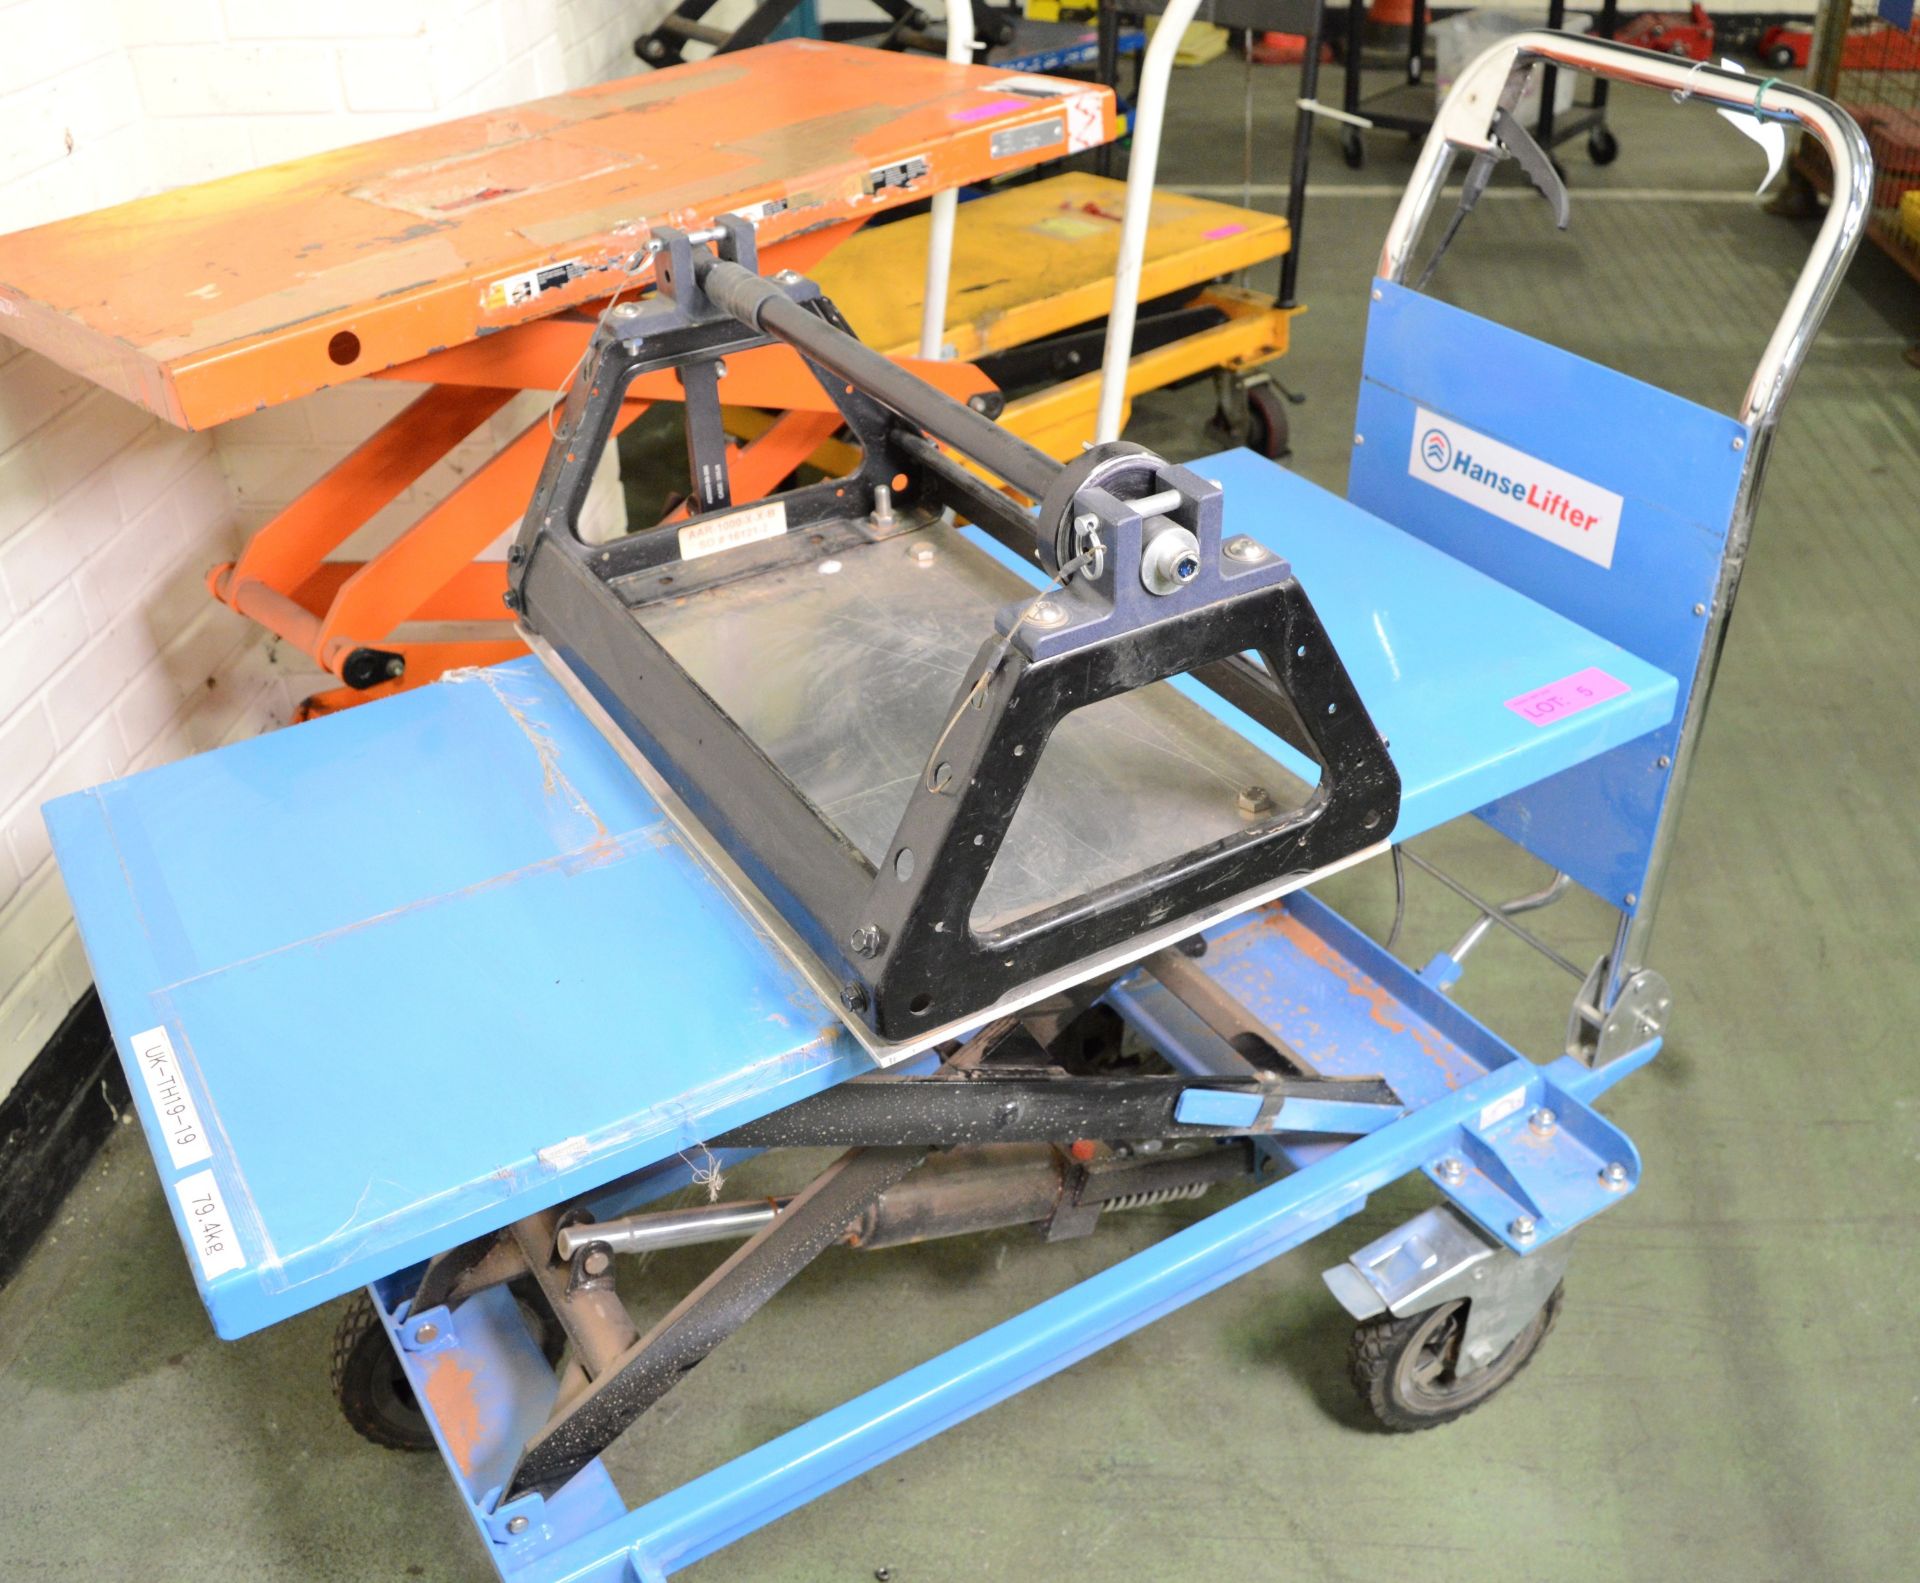 HanseLifter Mobile Lifting Platform Trolley With Reel Winder. - Image 3 of 3